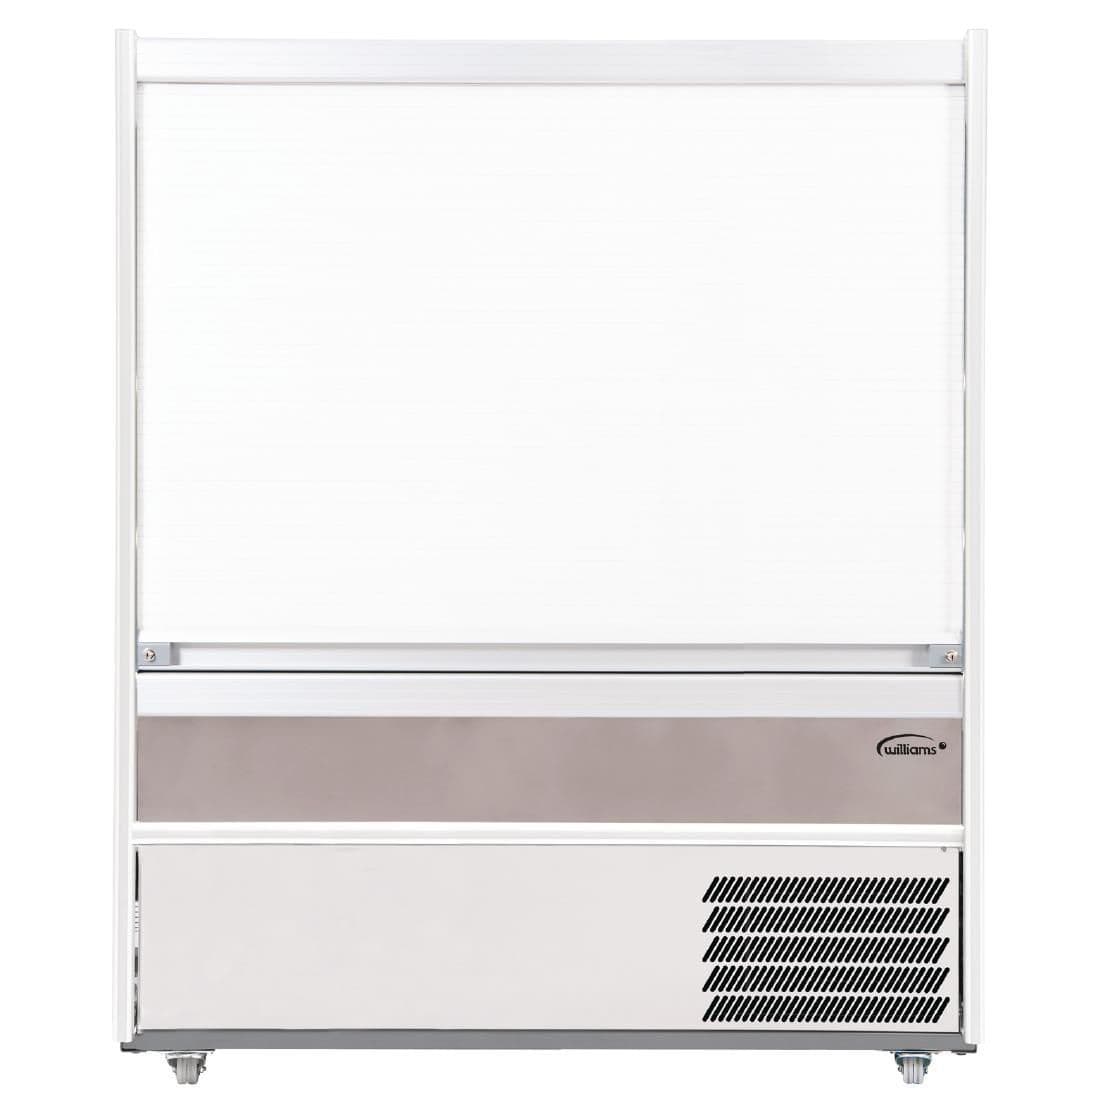 DP473 Williams Slimline Gem Multideck Stainless Steel with Security Shutter Width 1510mm R150-SCS JD Catering Equipment Solutions Ltd